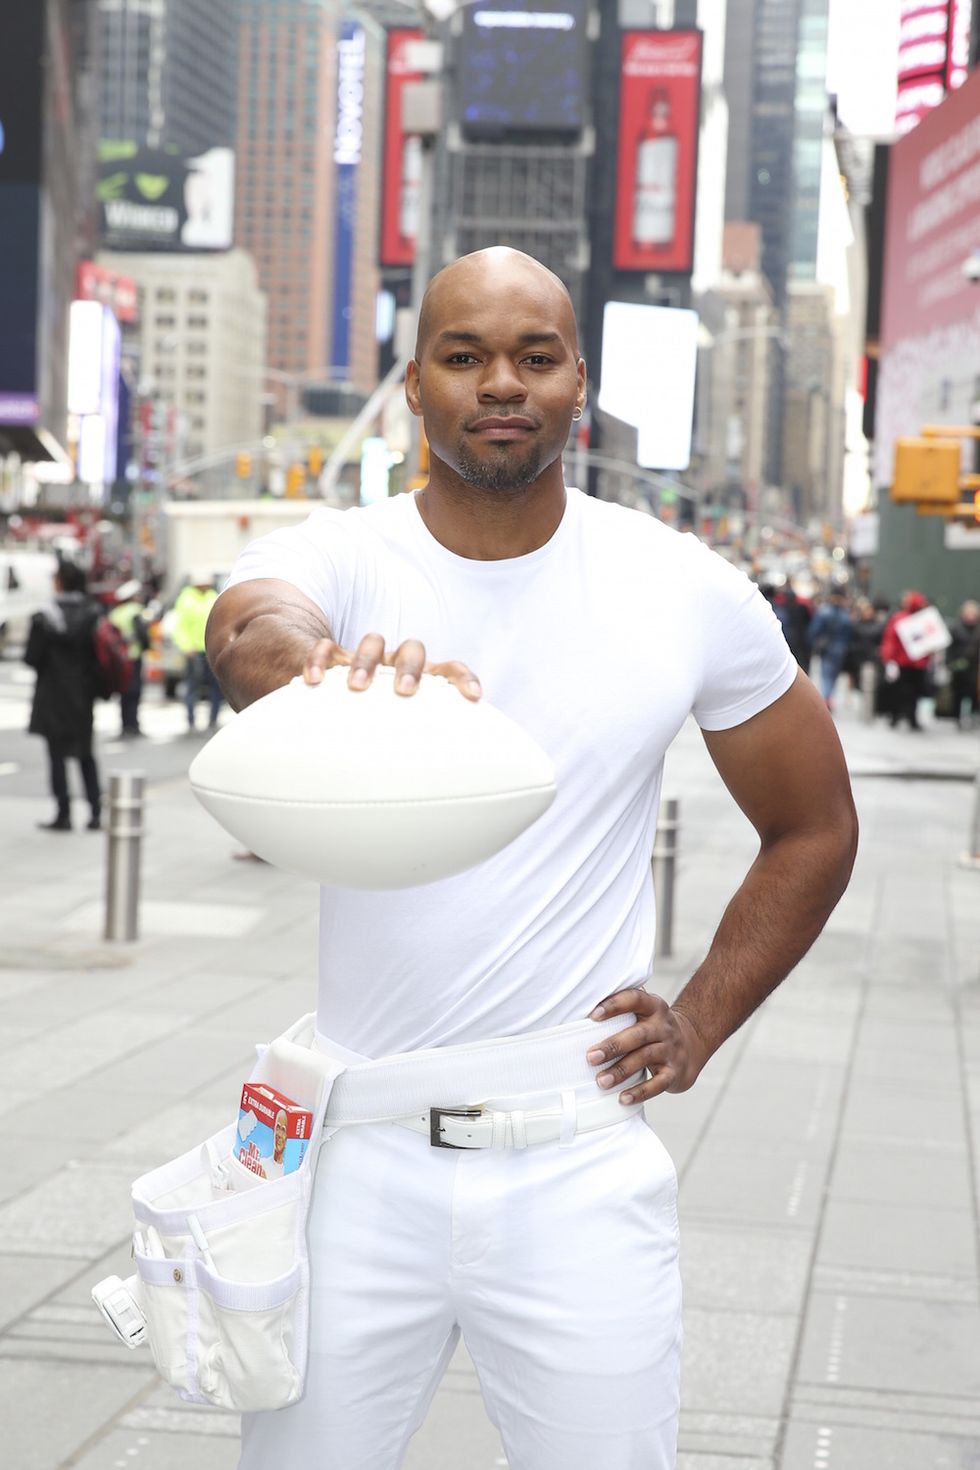 Meet Mike Jackson, the Newest Face of Mr. Clean - There's a New Mr. Clean